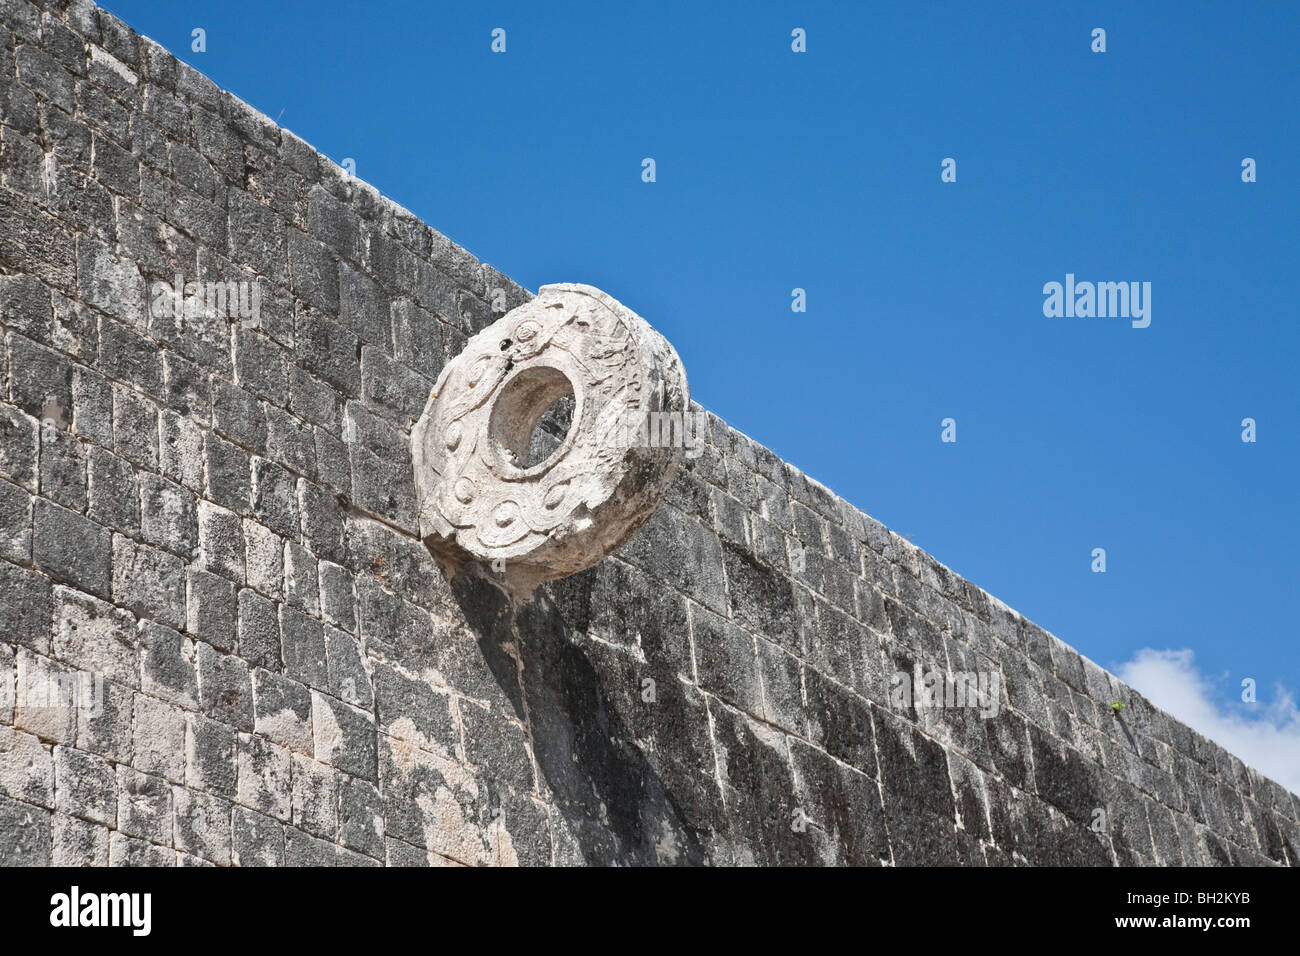 The Ring or Marker of the Ball Court. The Ball Court of Chichen Itza. Chichen Itza Archaeological Site Yucatan Mexico. Stock Photo